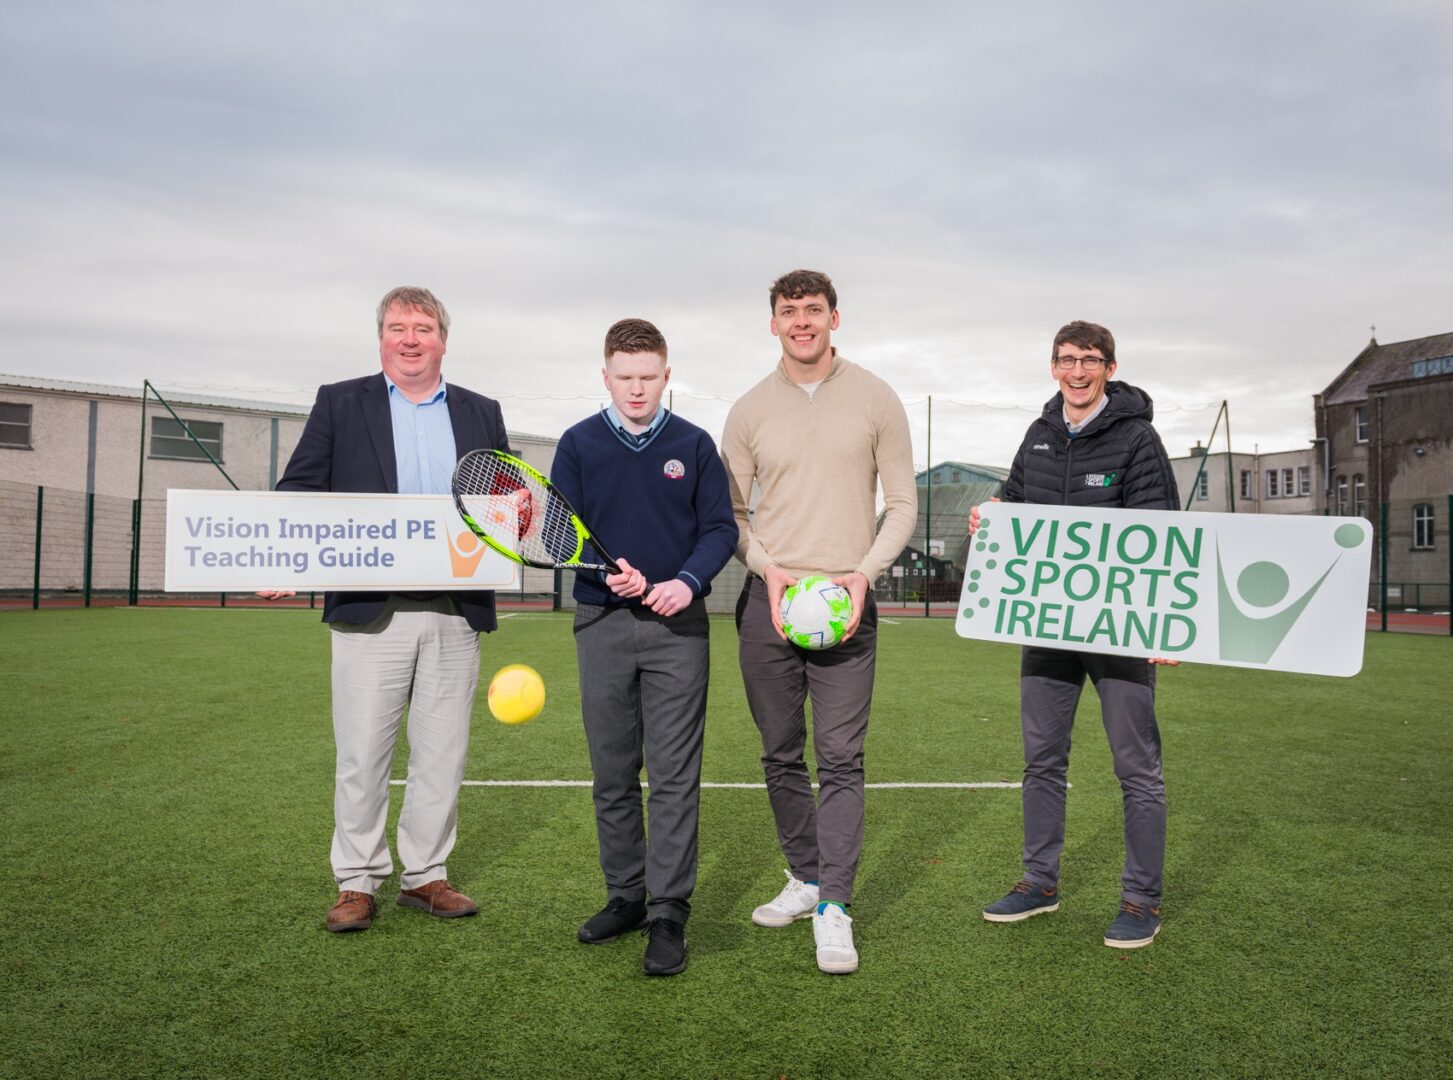 Photo of Senator Martin Conway, Kerry footballer David Clifford and two others standing on playing pitch with signs saying Vision Impaired PE Teaching Guide and Vision Sports Ireland.